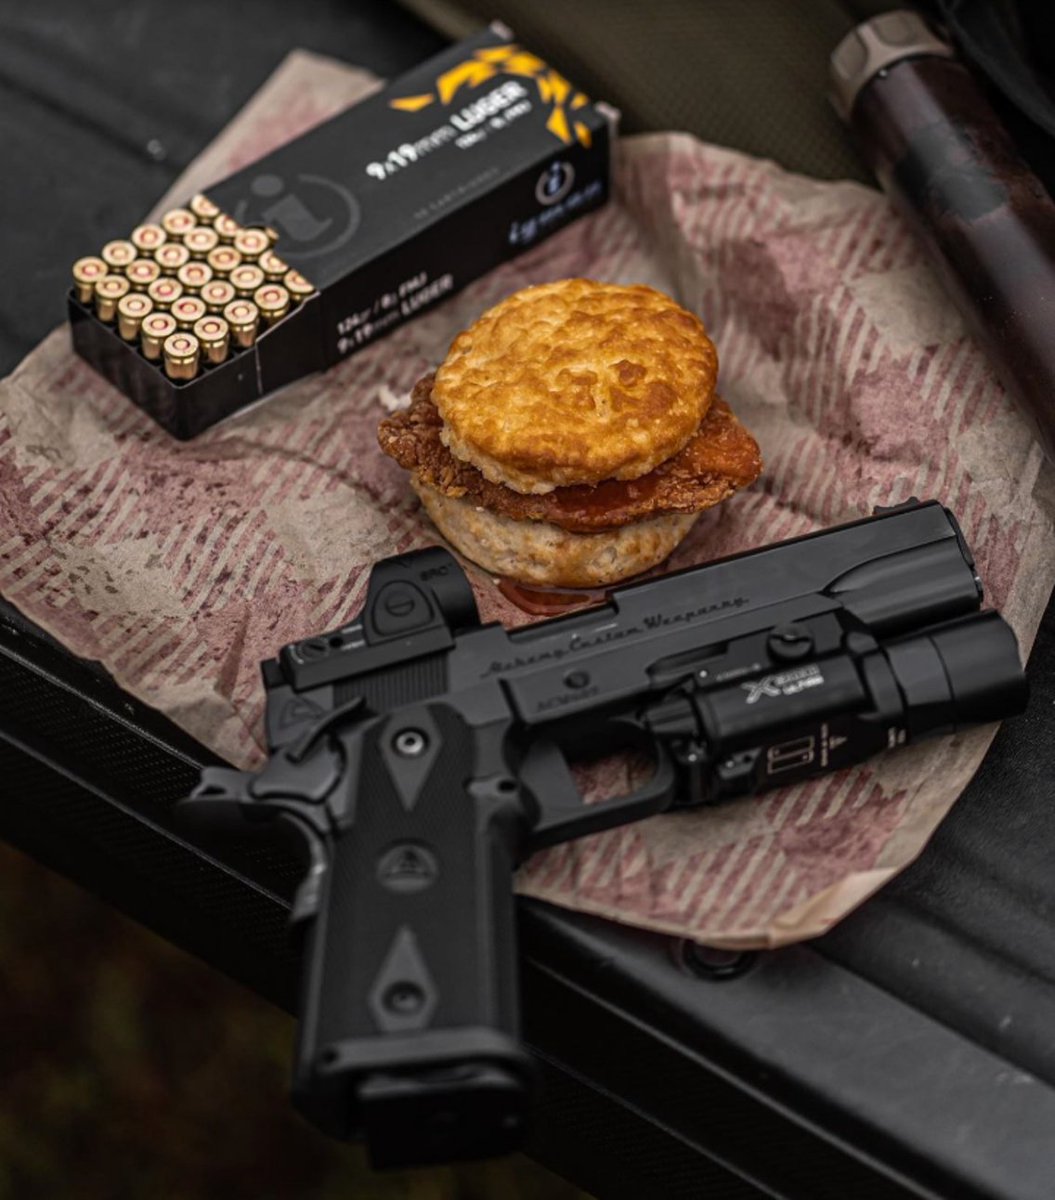 Everybody knows you shoot better after a chicken biscuit.

📷 IG: 1776_duck
@Bojangles

#SRO #RangeDay #itsbotime